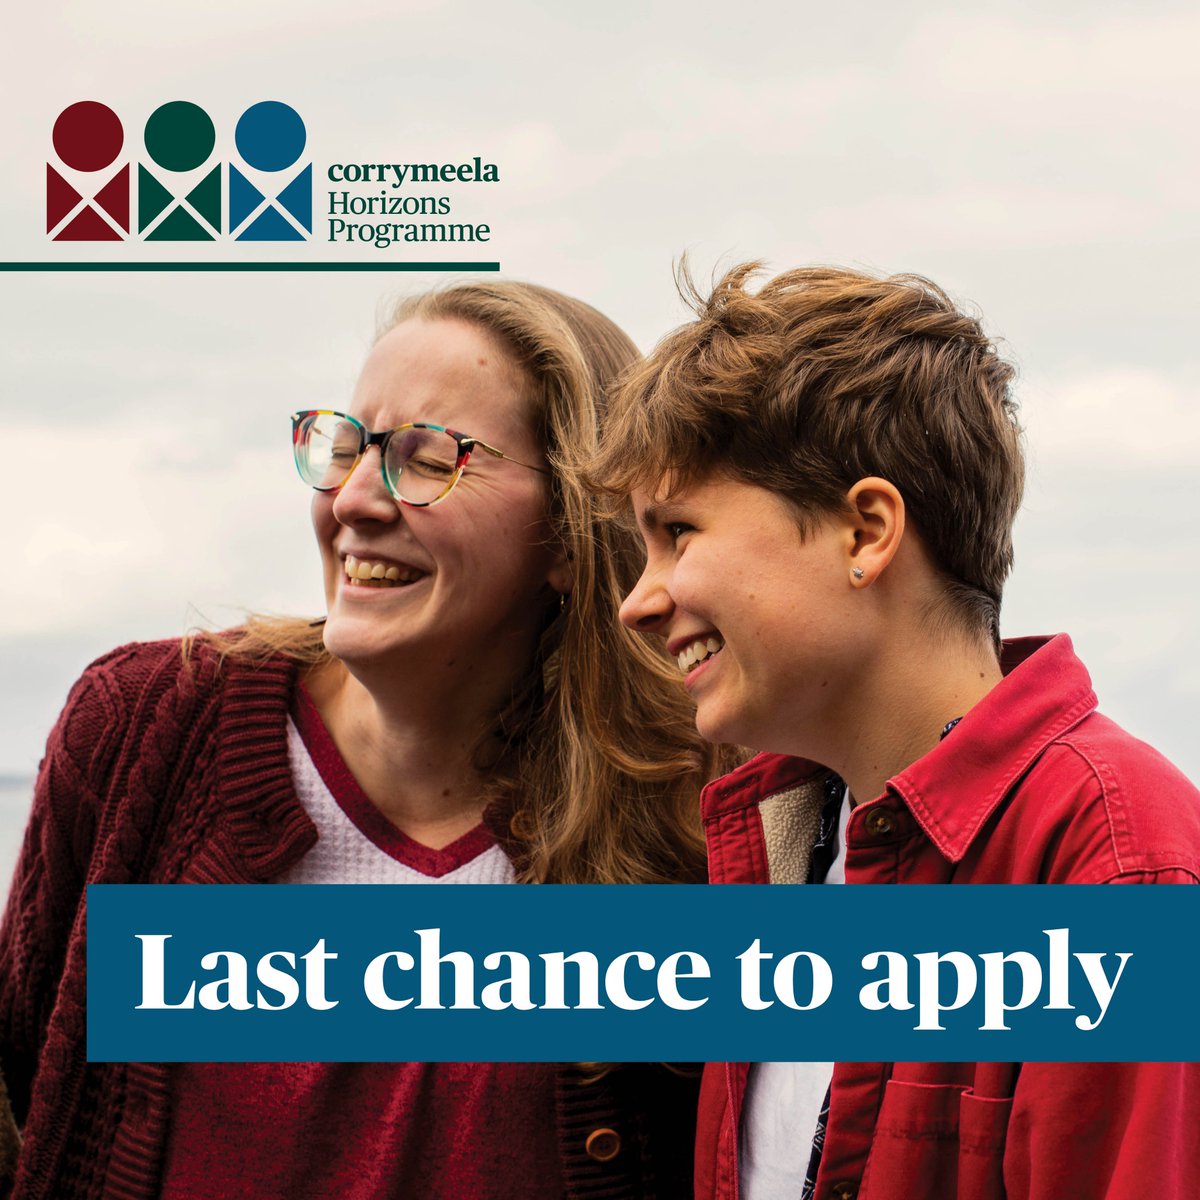 ⏰ Last chance to apply for our Sept 24 – Aug 25 Horizons Volunteer Programme! ⏰ Final deadline for applications is this Fri 8th March, @ 9am. Could you be one of next year's volunteers? Apply now or find out more about the Corrymeela Horizons Programme: corrymeela.org/volunteer